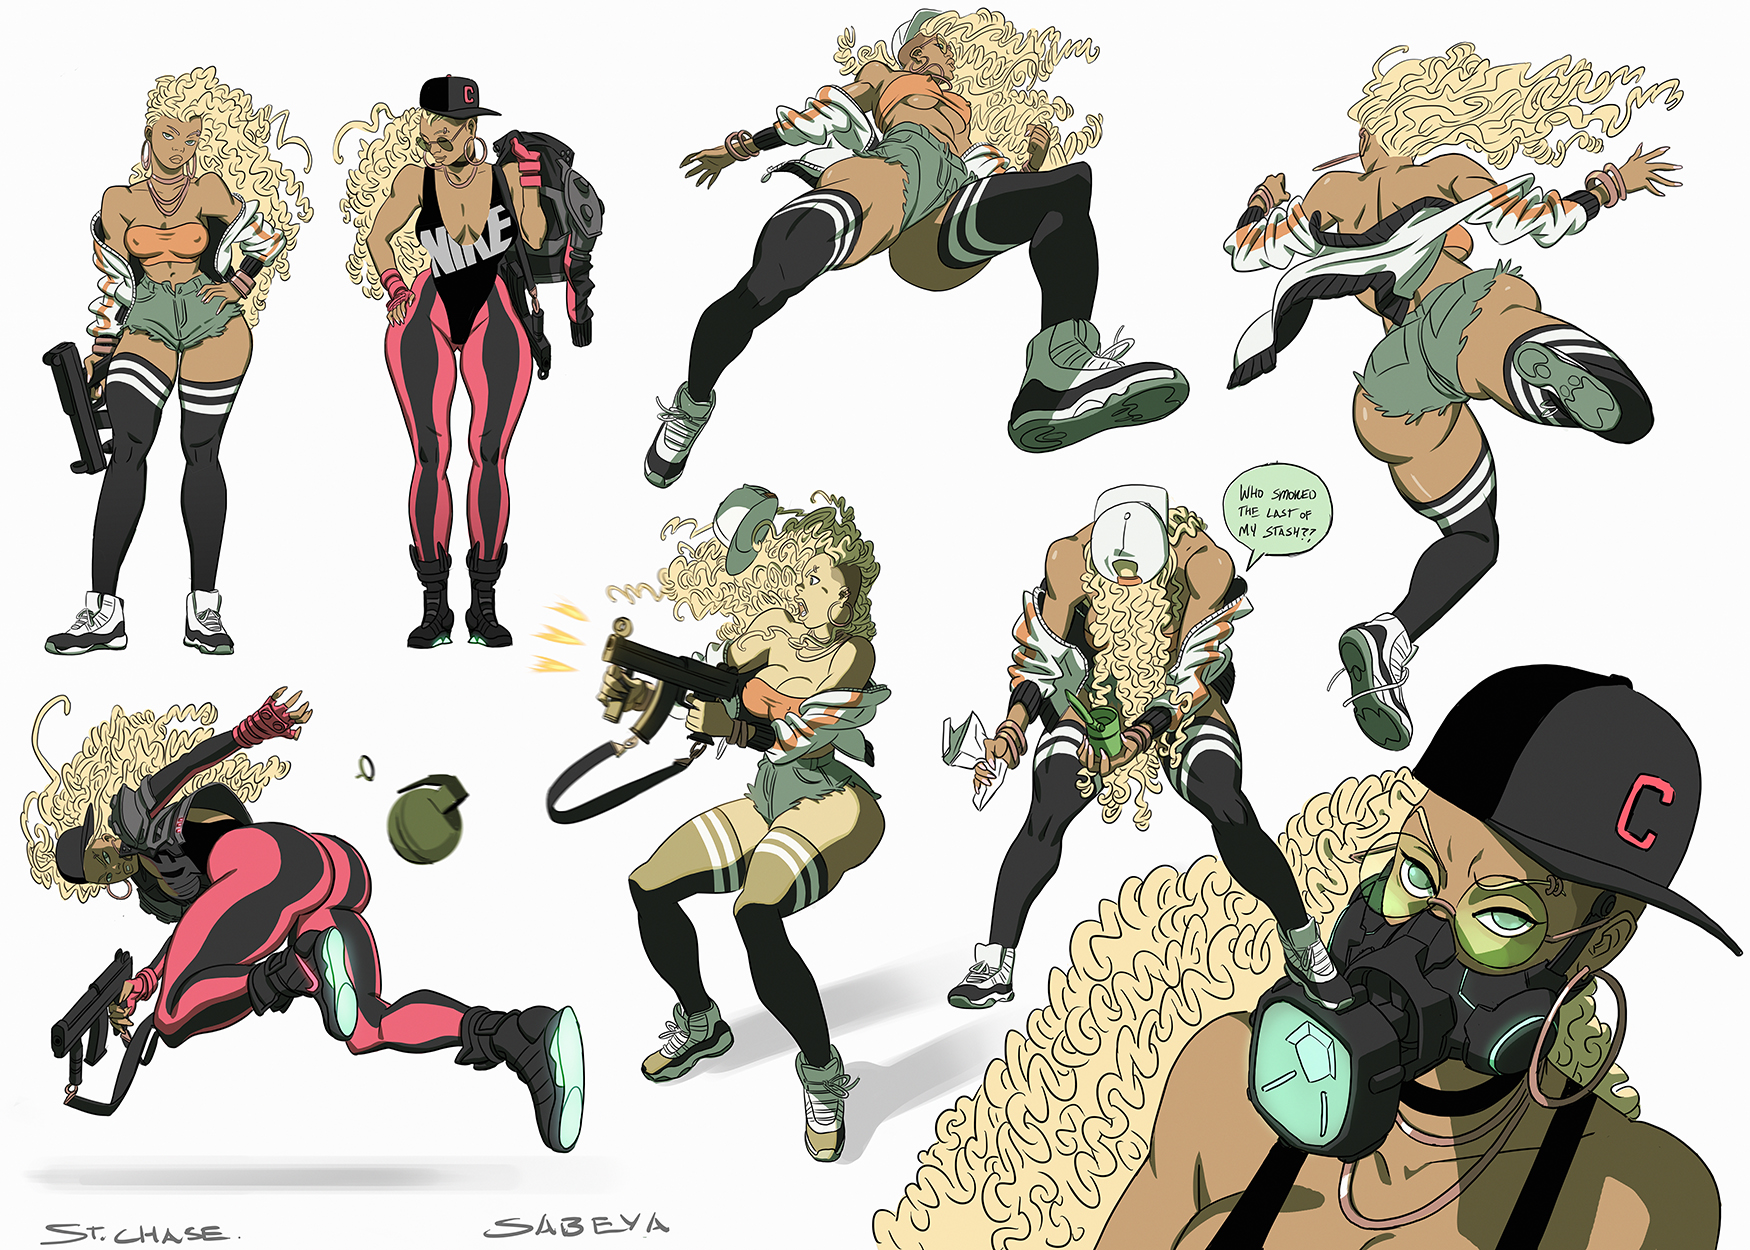 Sabeya action poses -COLOR by ChaseConley on DeviantArt